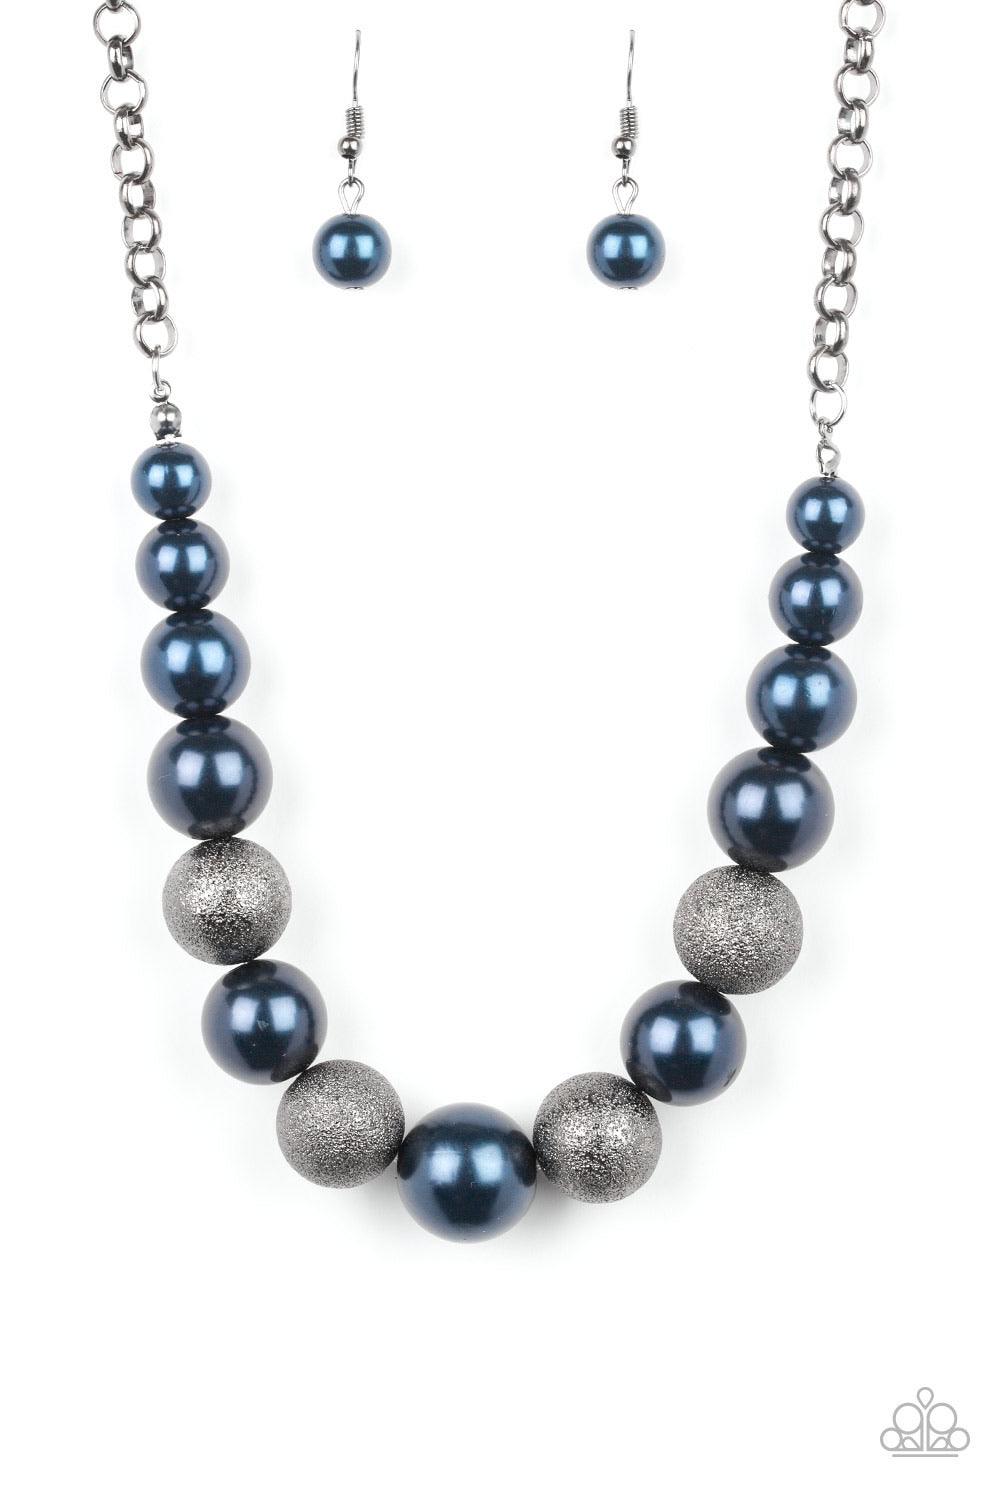 Paparazzi Accessories Color Me CEO - Blue Dusted in glitter, sparkling gunmetal and pearly blue beads are threaded along an invisible wire below the collar for a glamorous look. Features an adjustable clasp closure. Sold as one individual necklace. Includ